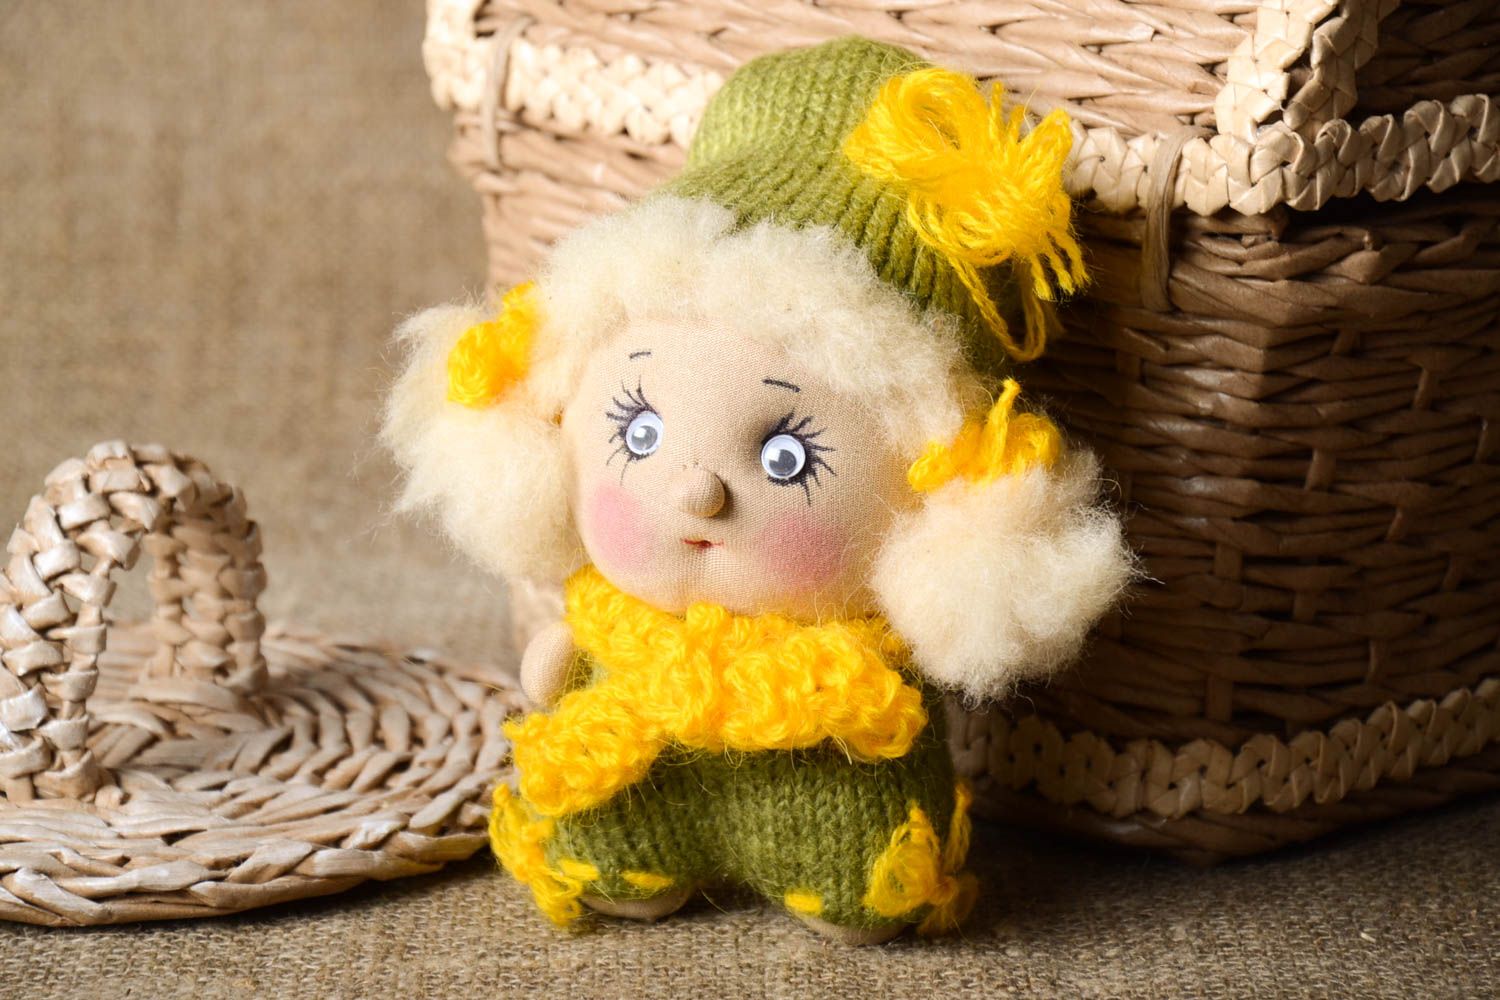 Cute designer soft toy interesting unusual accessories lovely handmade doll photo 1